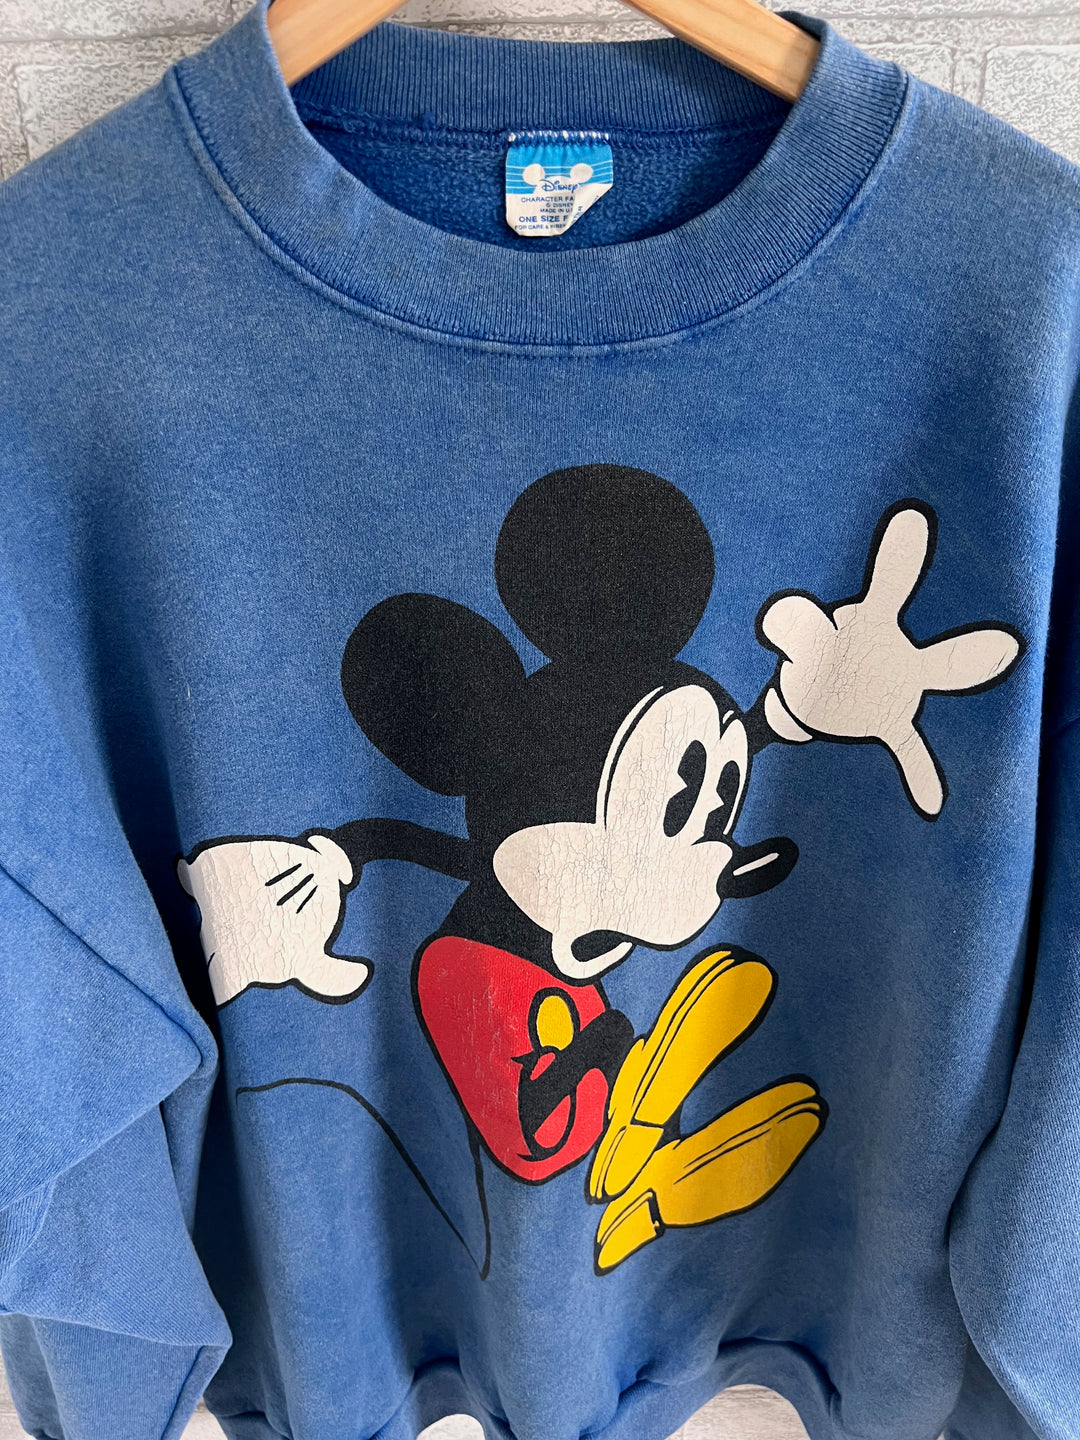 Rare Vintage Disney Blue One size fits all tag.